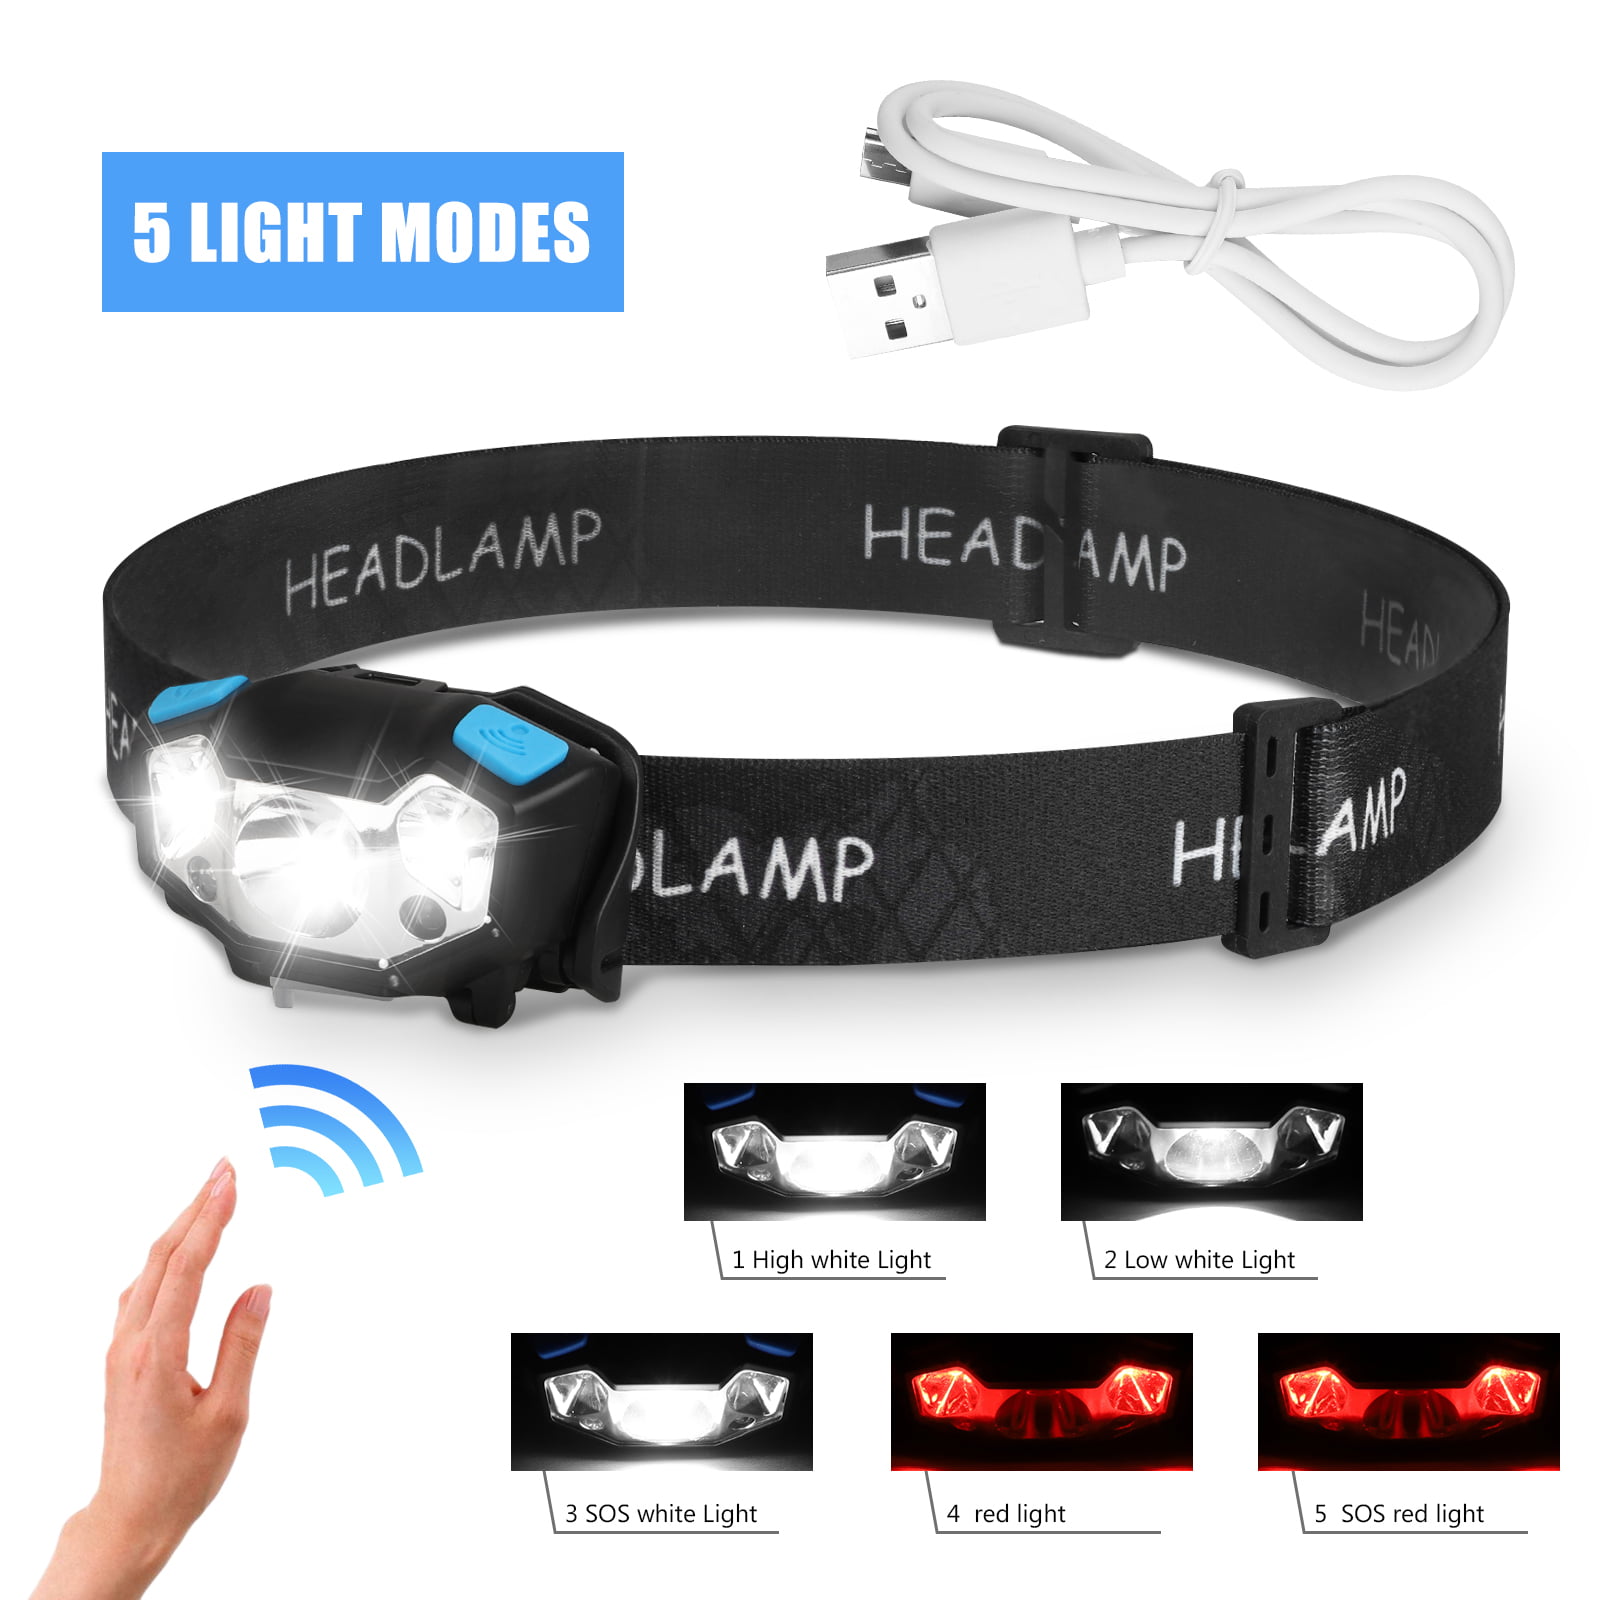 Comfortable Equipment for Running Camping Men Woman Kid Waterproof Super Bright Torch Best Bulb Lamp for Night Walking the Dog Headlamp LED USB Rechargeable White and or Red Light with 5 Modes